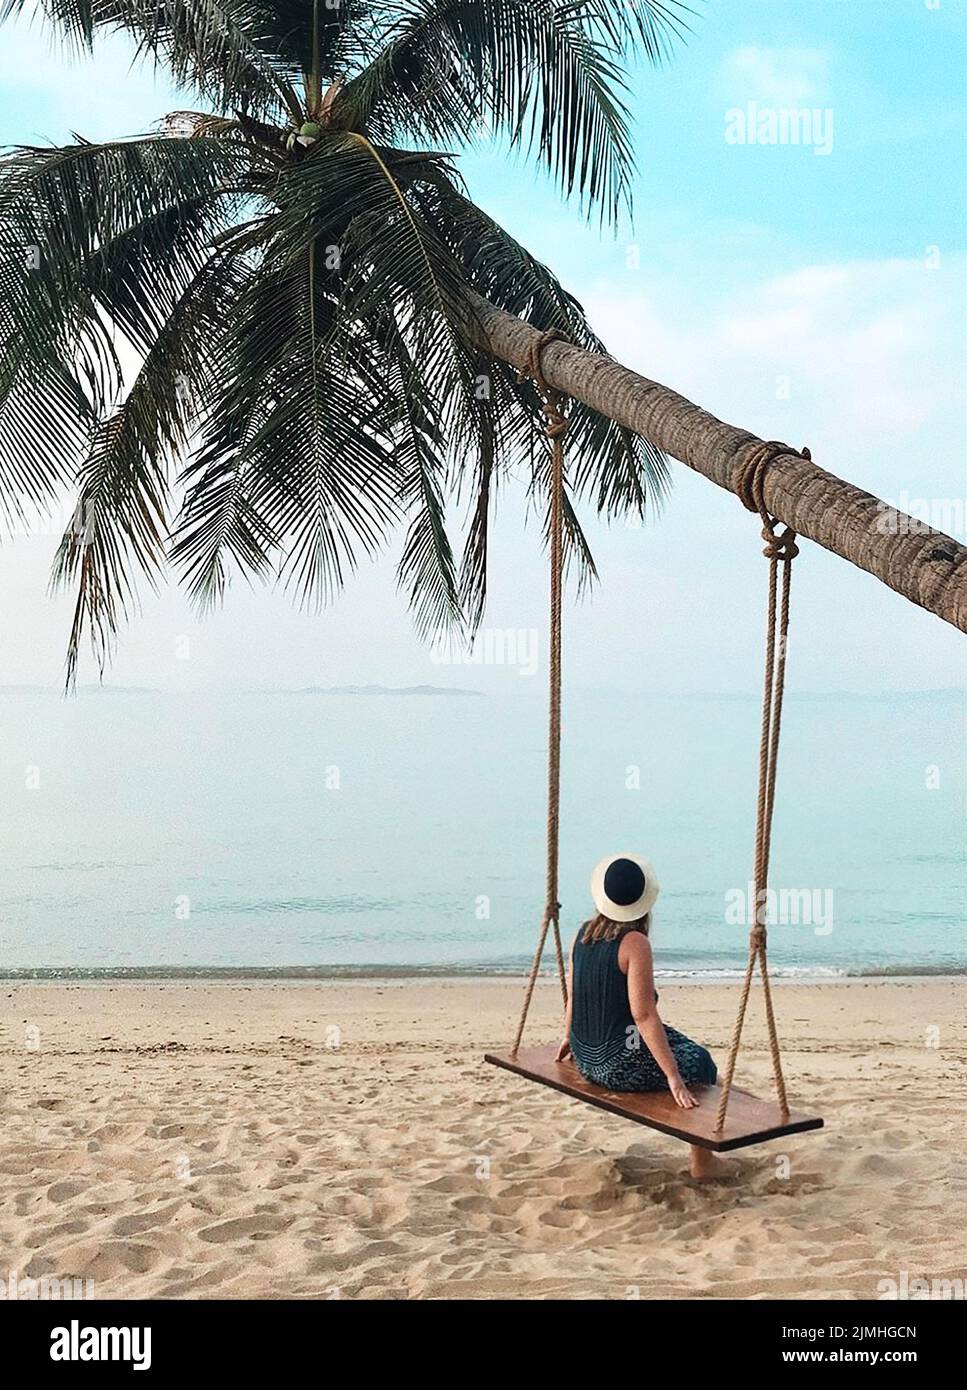 Woman sitting on swing hanging on palm tree and looking at calm blue ocean on paradise sandy beach Stock Photo